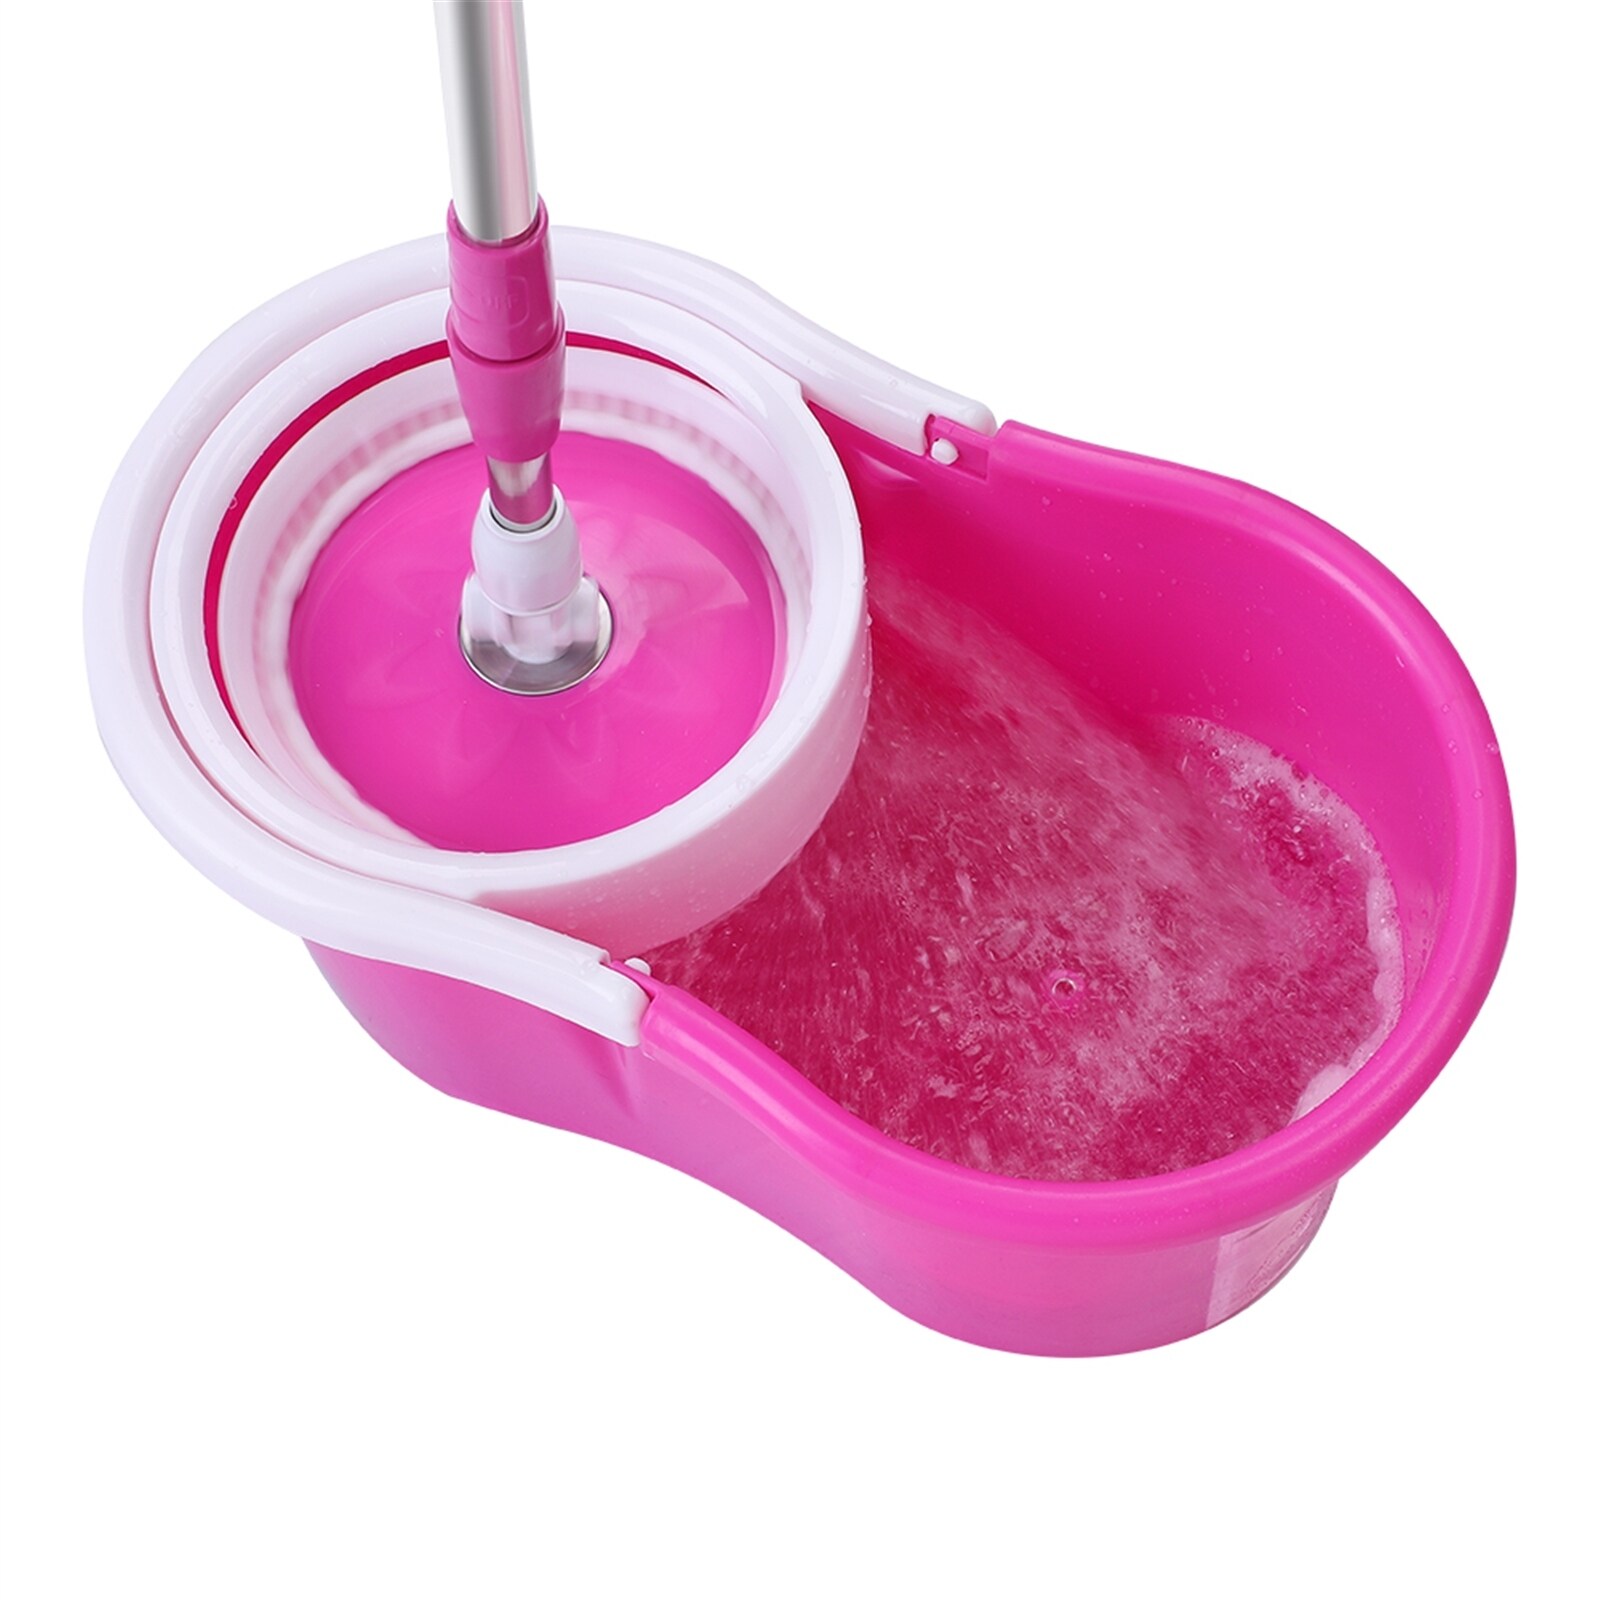 https://ak1.ostkcdn.com/images/products/is/images/direct/bca84c415db2665f791520afa2a1c645756ea094/360%C2%B0-Spin-Mop-with-Bucket-%26-Dual-Mop-Heads.jpg